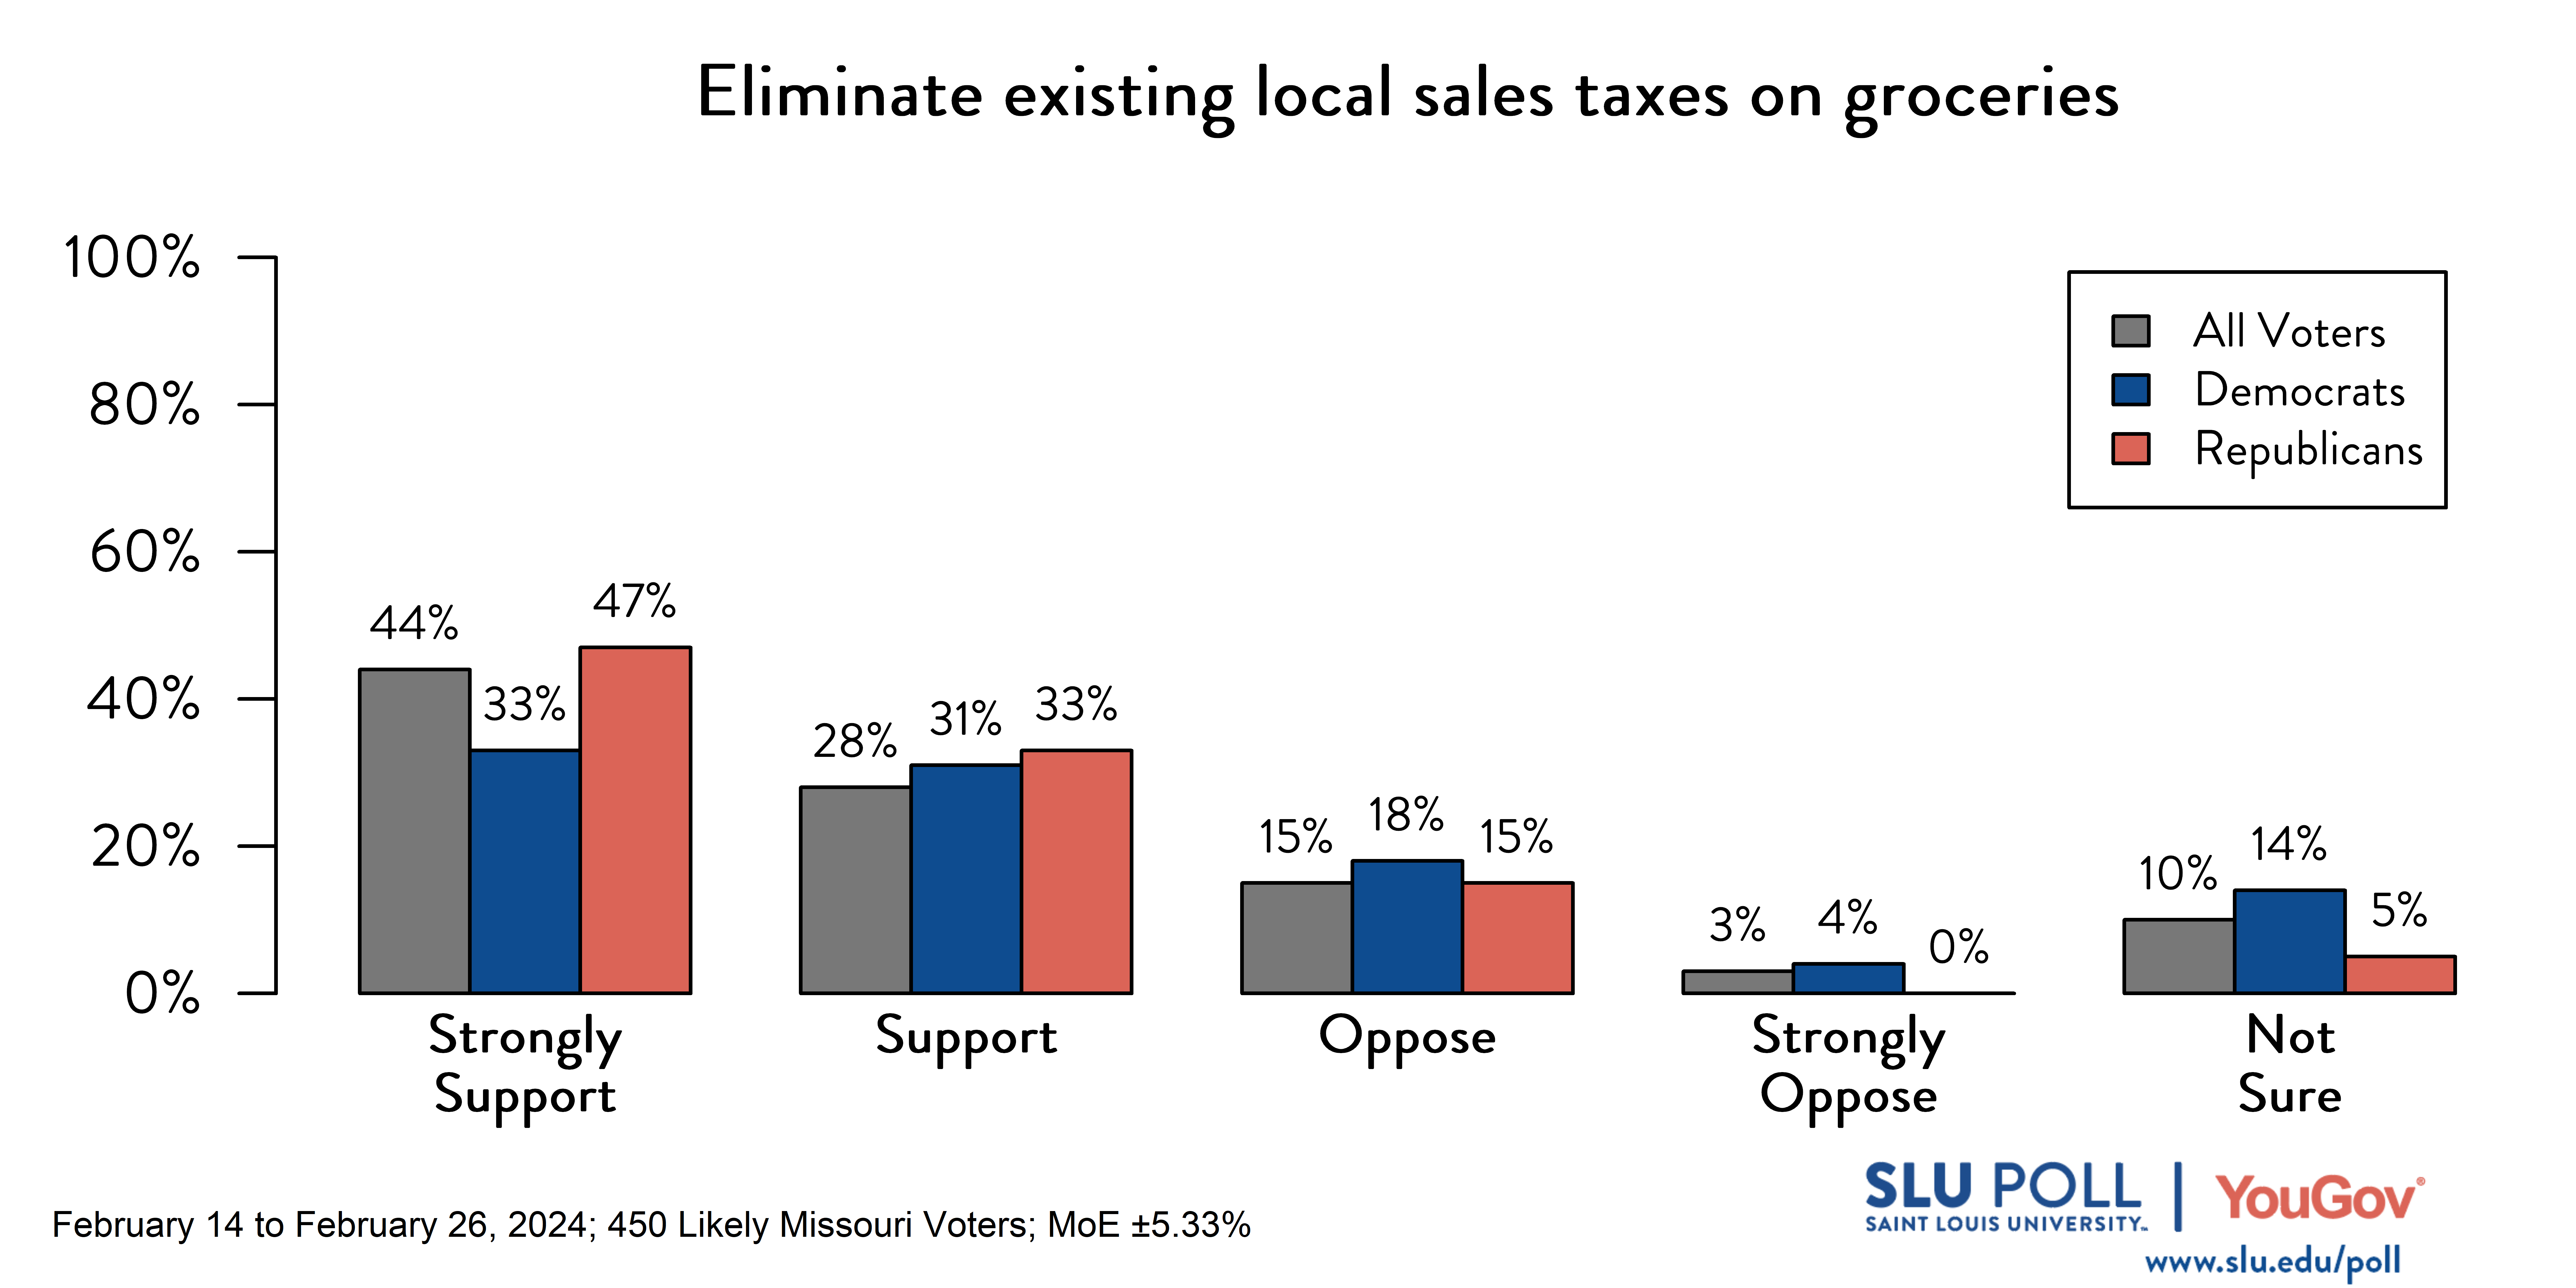 Likely voters' responses to 'Do you support the following policies…Eliminate existing local sale taxes on groceries?': 44% Strongly support, 28% Support, 15% Oppose, 3% Strongly oppose, and 10% Not sure. Democratic voters' responses: ' 33% Strongly support, 31% Support, 18% Oppose, 4% Strongly oppose, and 14% Not sure. Republican voters' responses:  47% Strongly support, 33% Support, 15% Oppose, 0% Strongly oppose, and 5% Not sure.